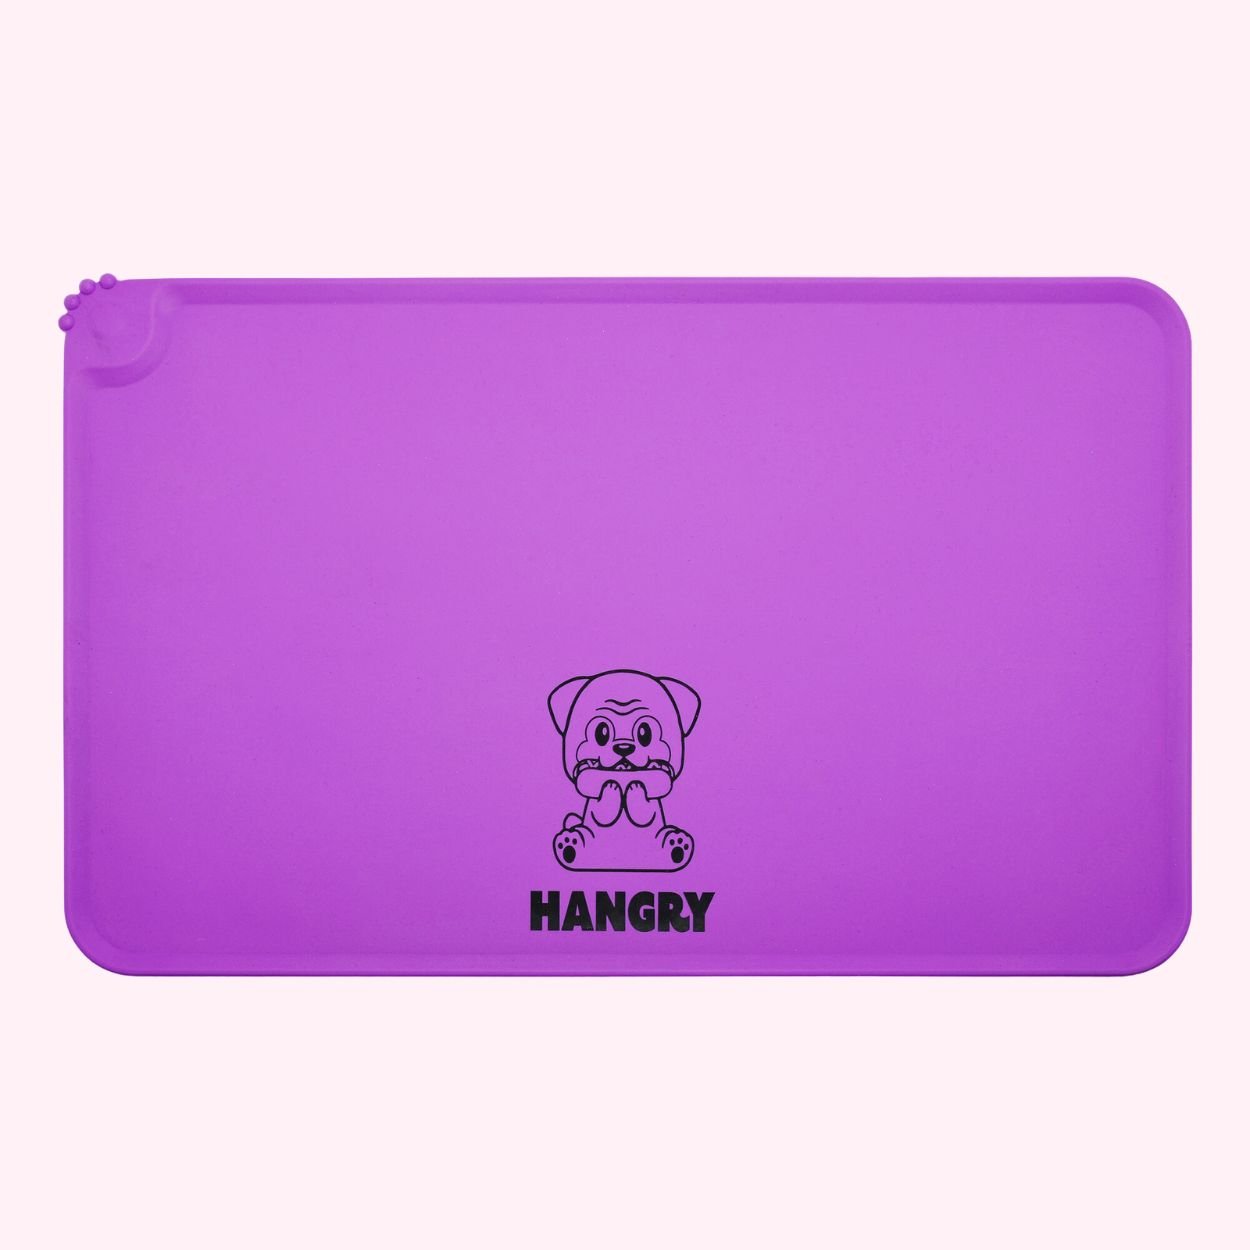 "Hangry" Dog Feeding Mat - Doggy Style Pet Accessories